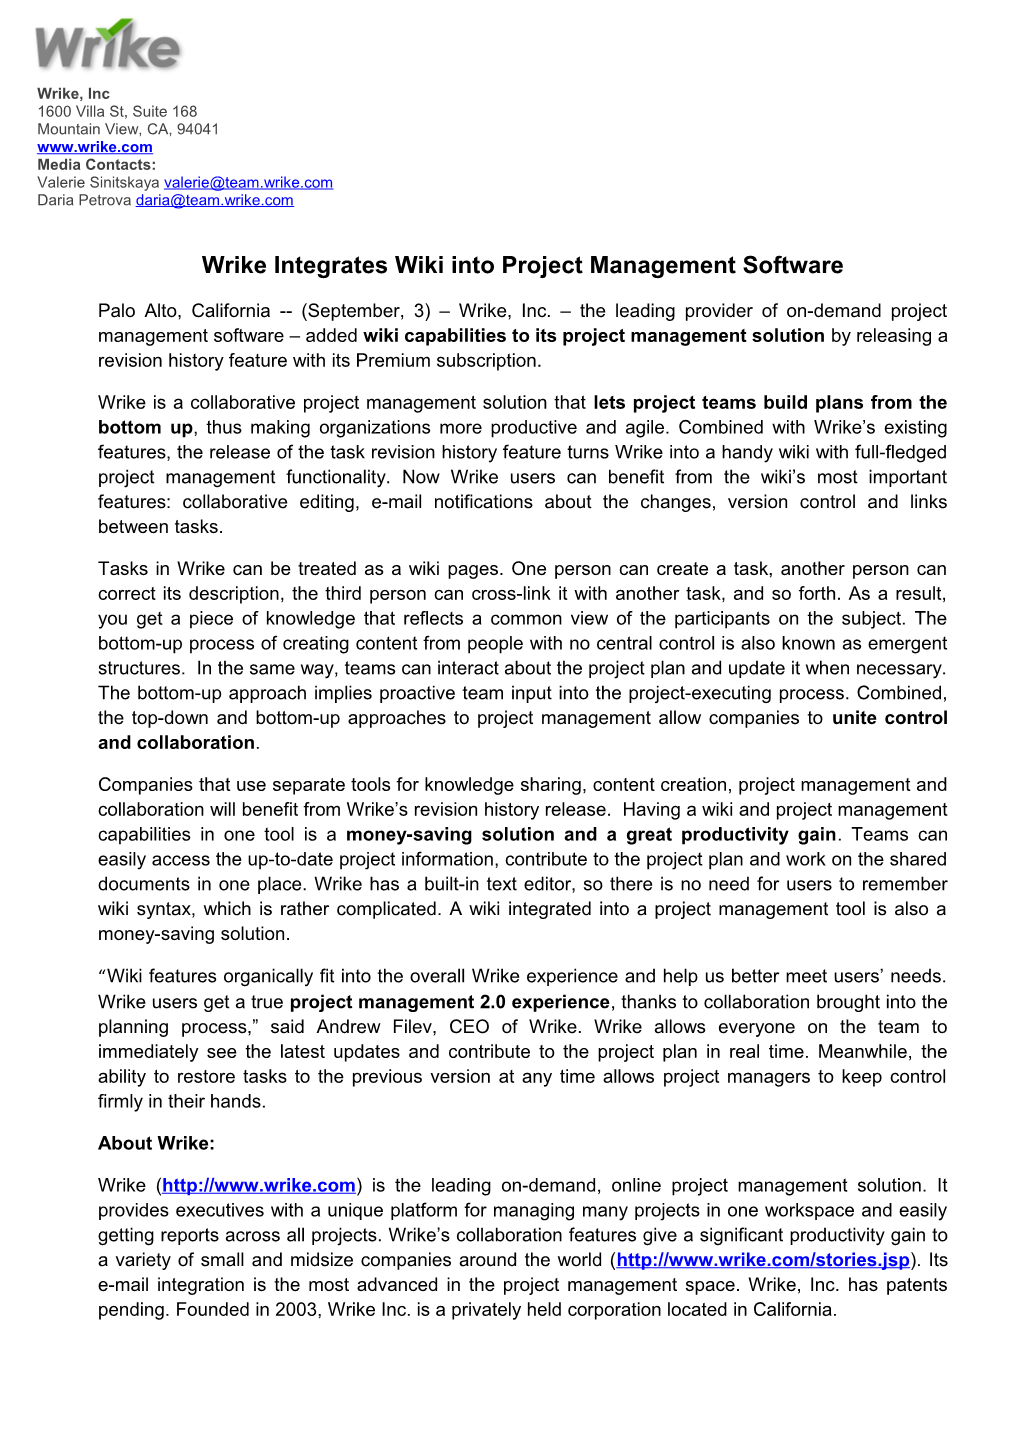 Wrike Integrates Wiki Into Project Management Software